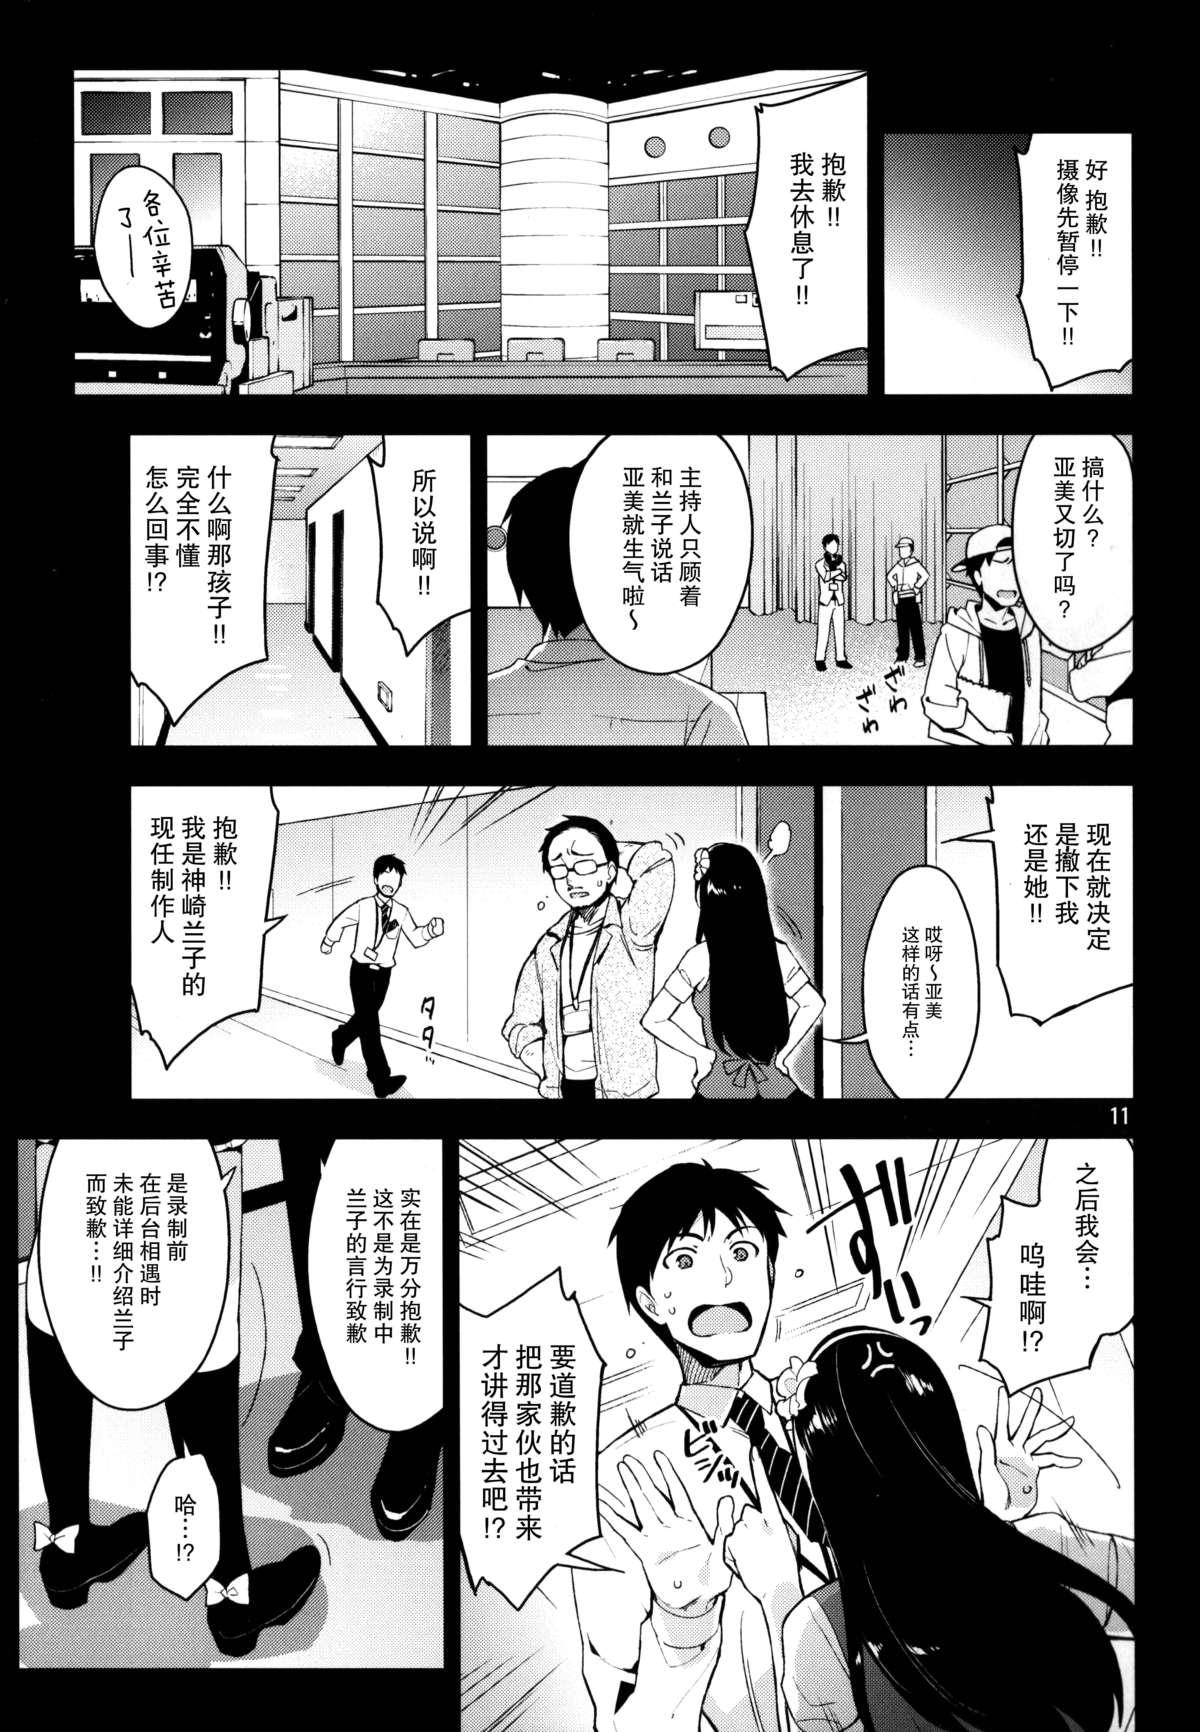 Indoor Cinderella, After the Ball - The idolmaster Squirt - Page 11